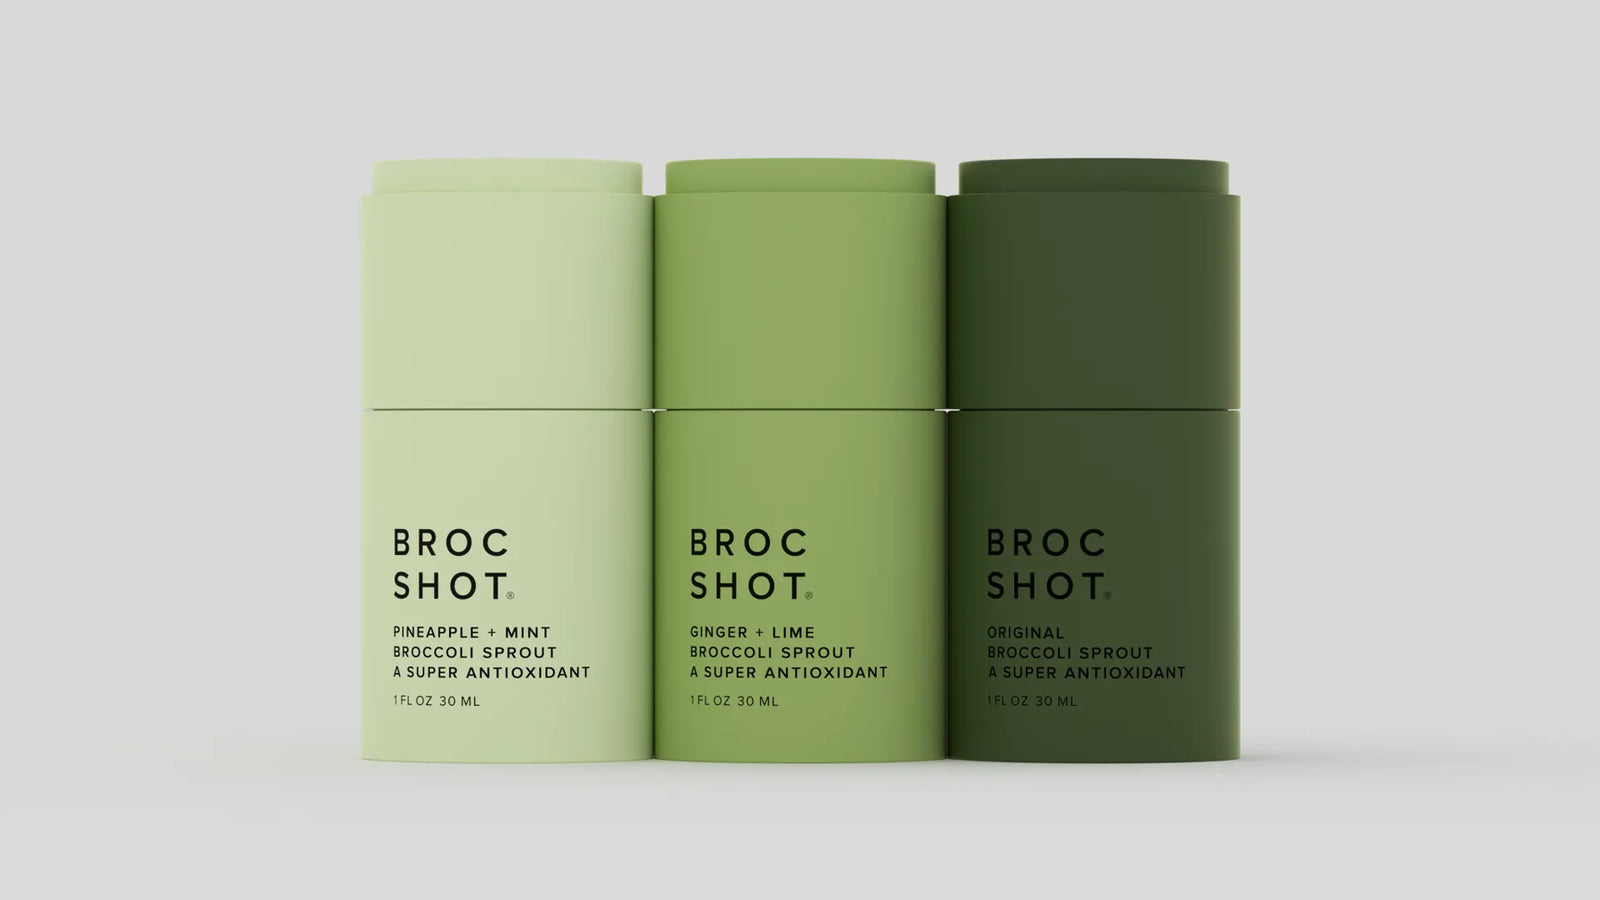 Broc Shot Helps Create Healthy Habits With High-Quality Packaging To Match